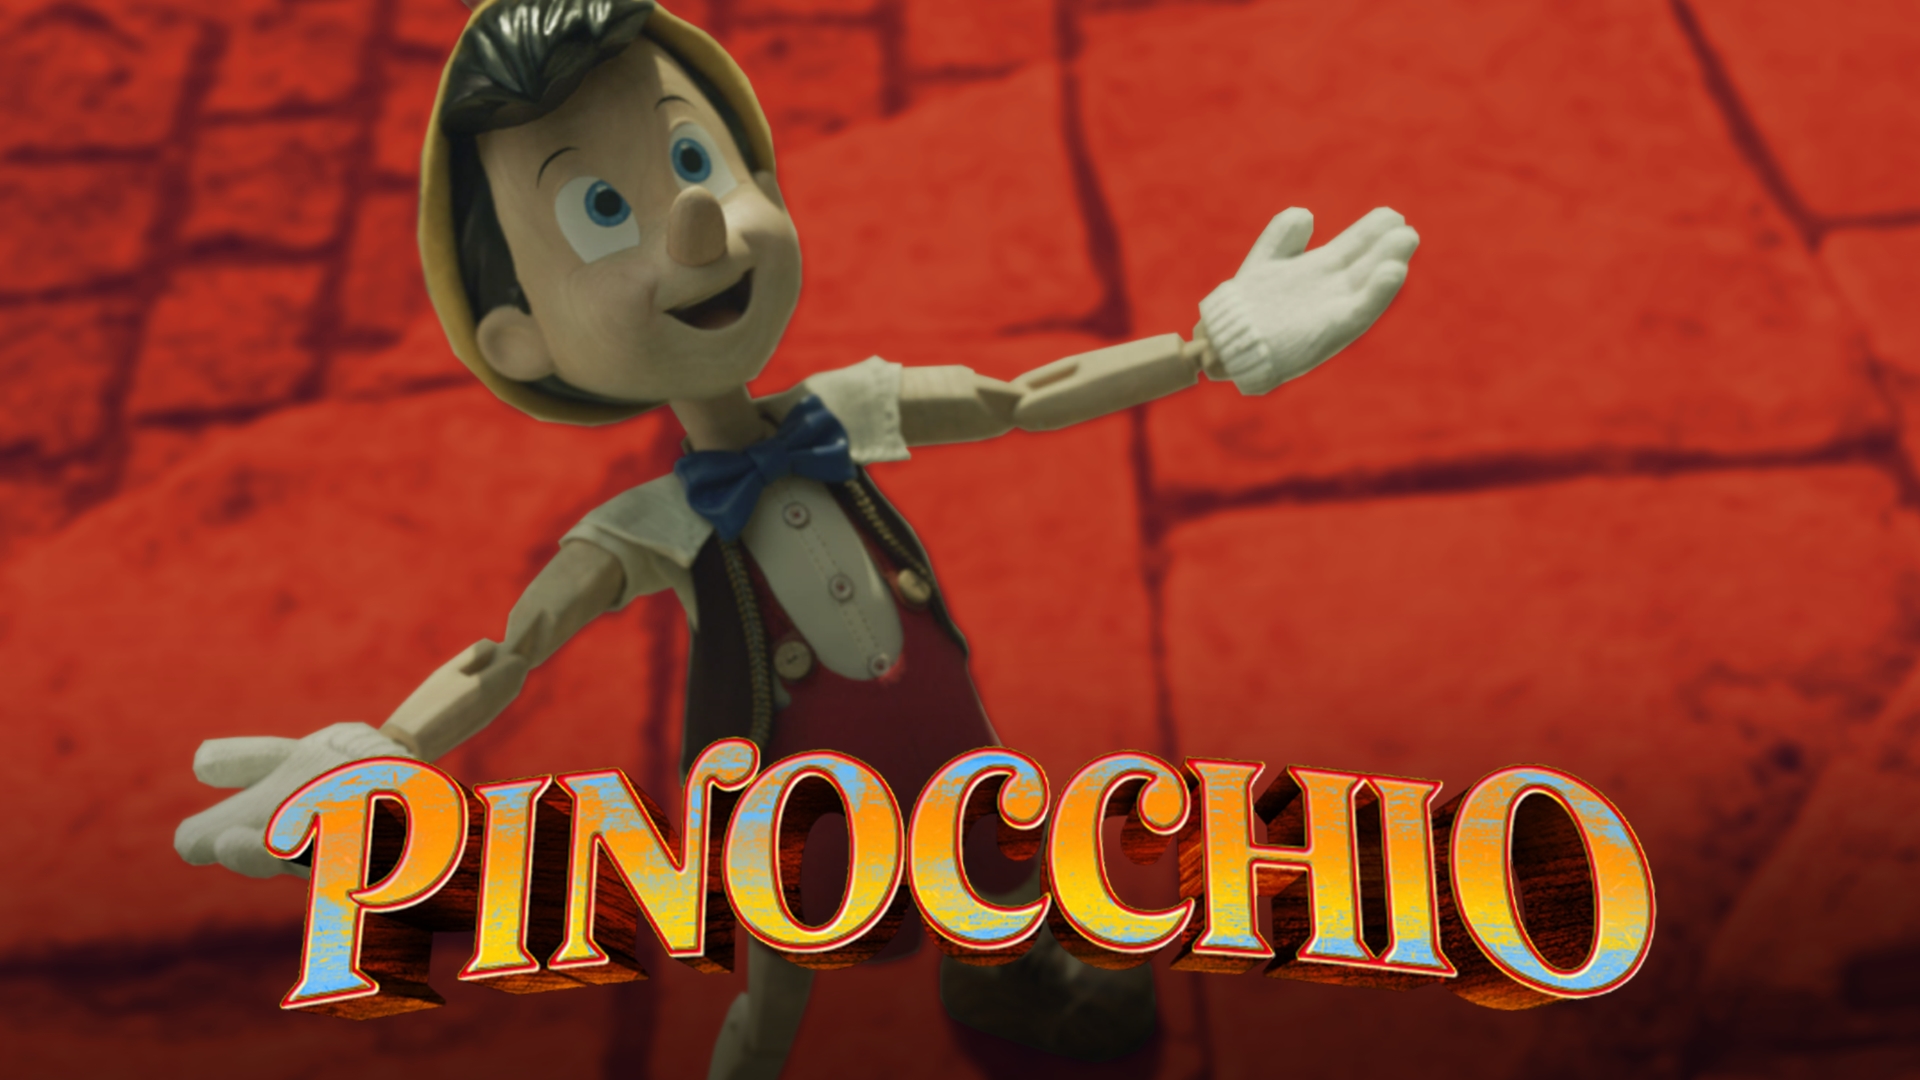 Okay, we liked the newest Pinocchio!